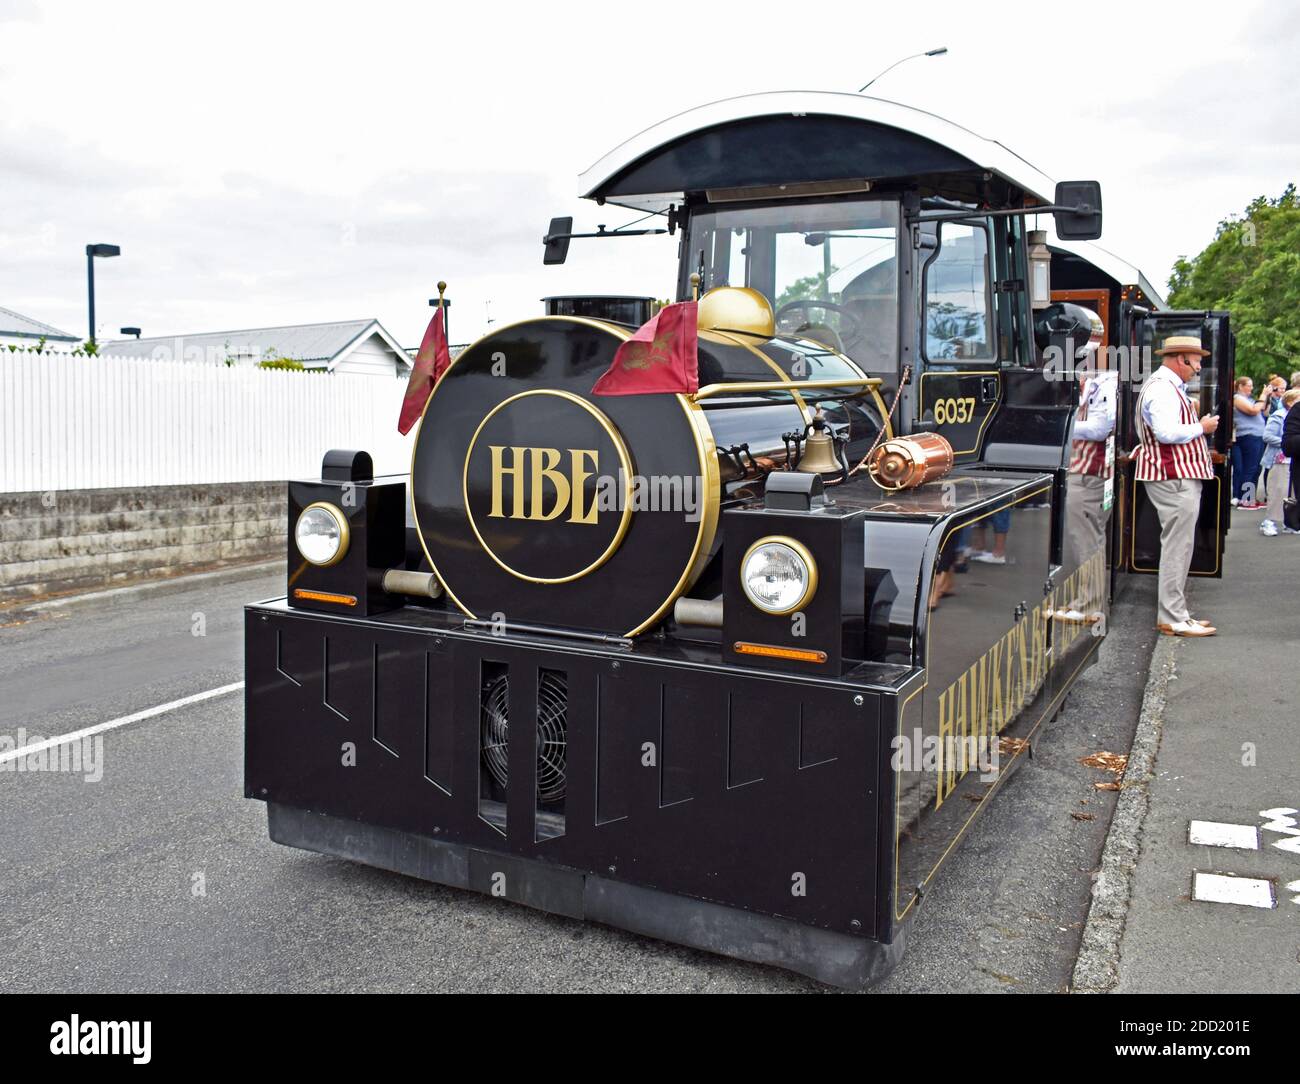 The Hawke's Bay Express, a modern road train styled as an old-fashioned steam engine in Napier, North island, New Zealand. Stock Photo